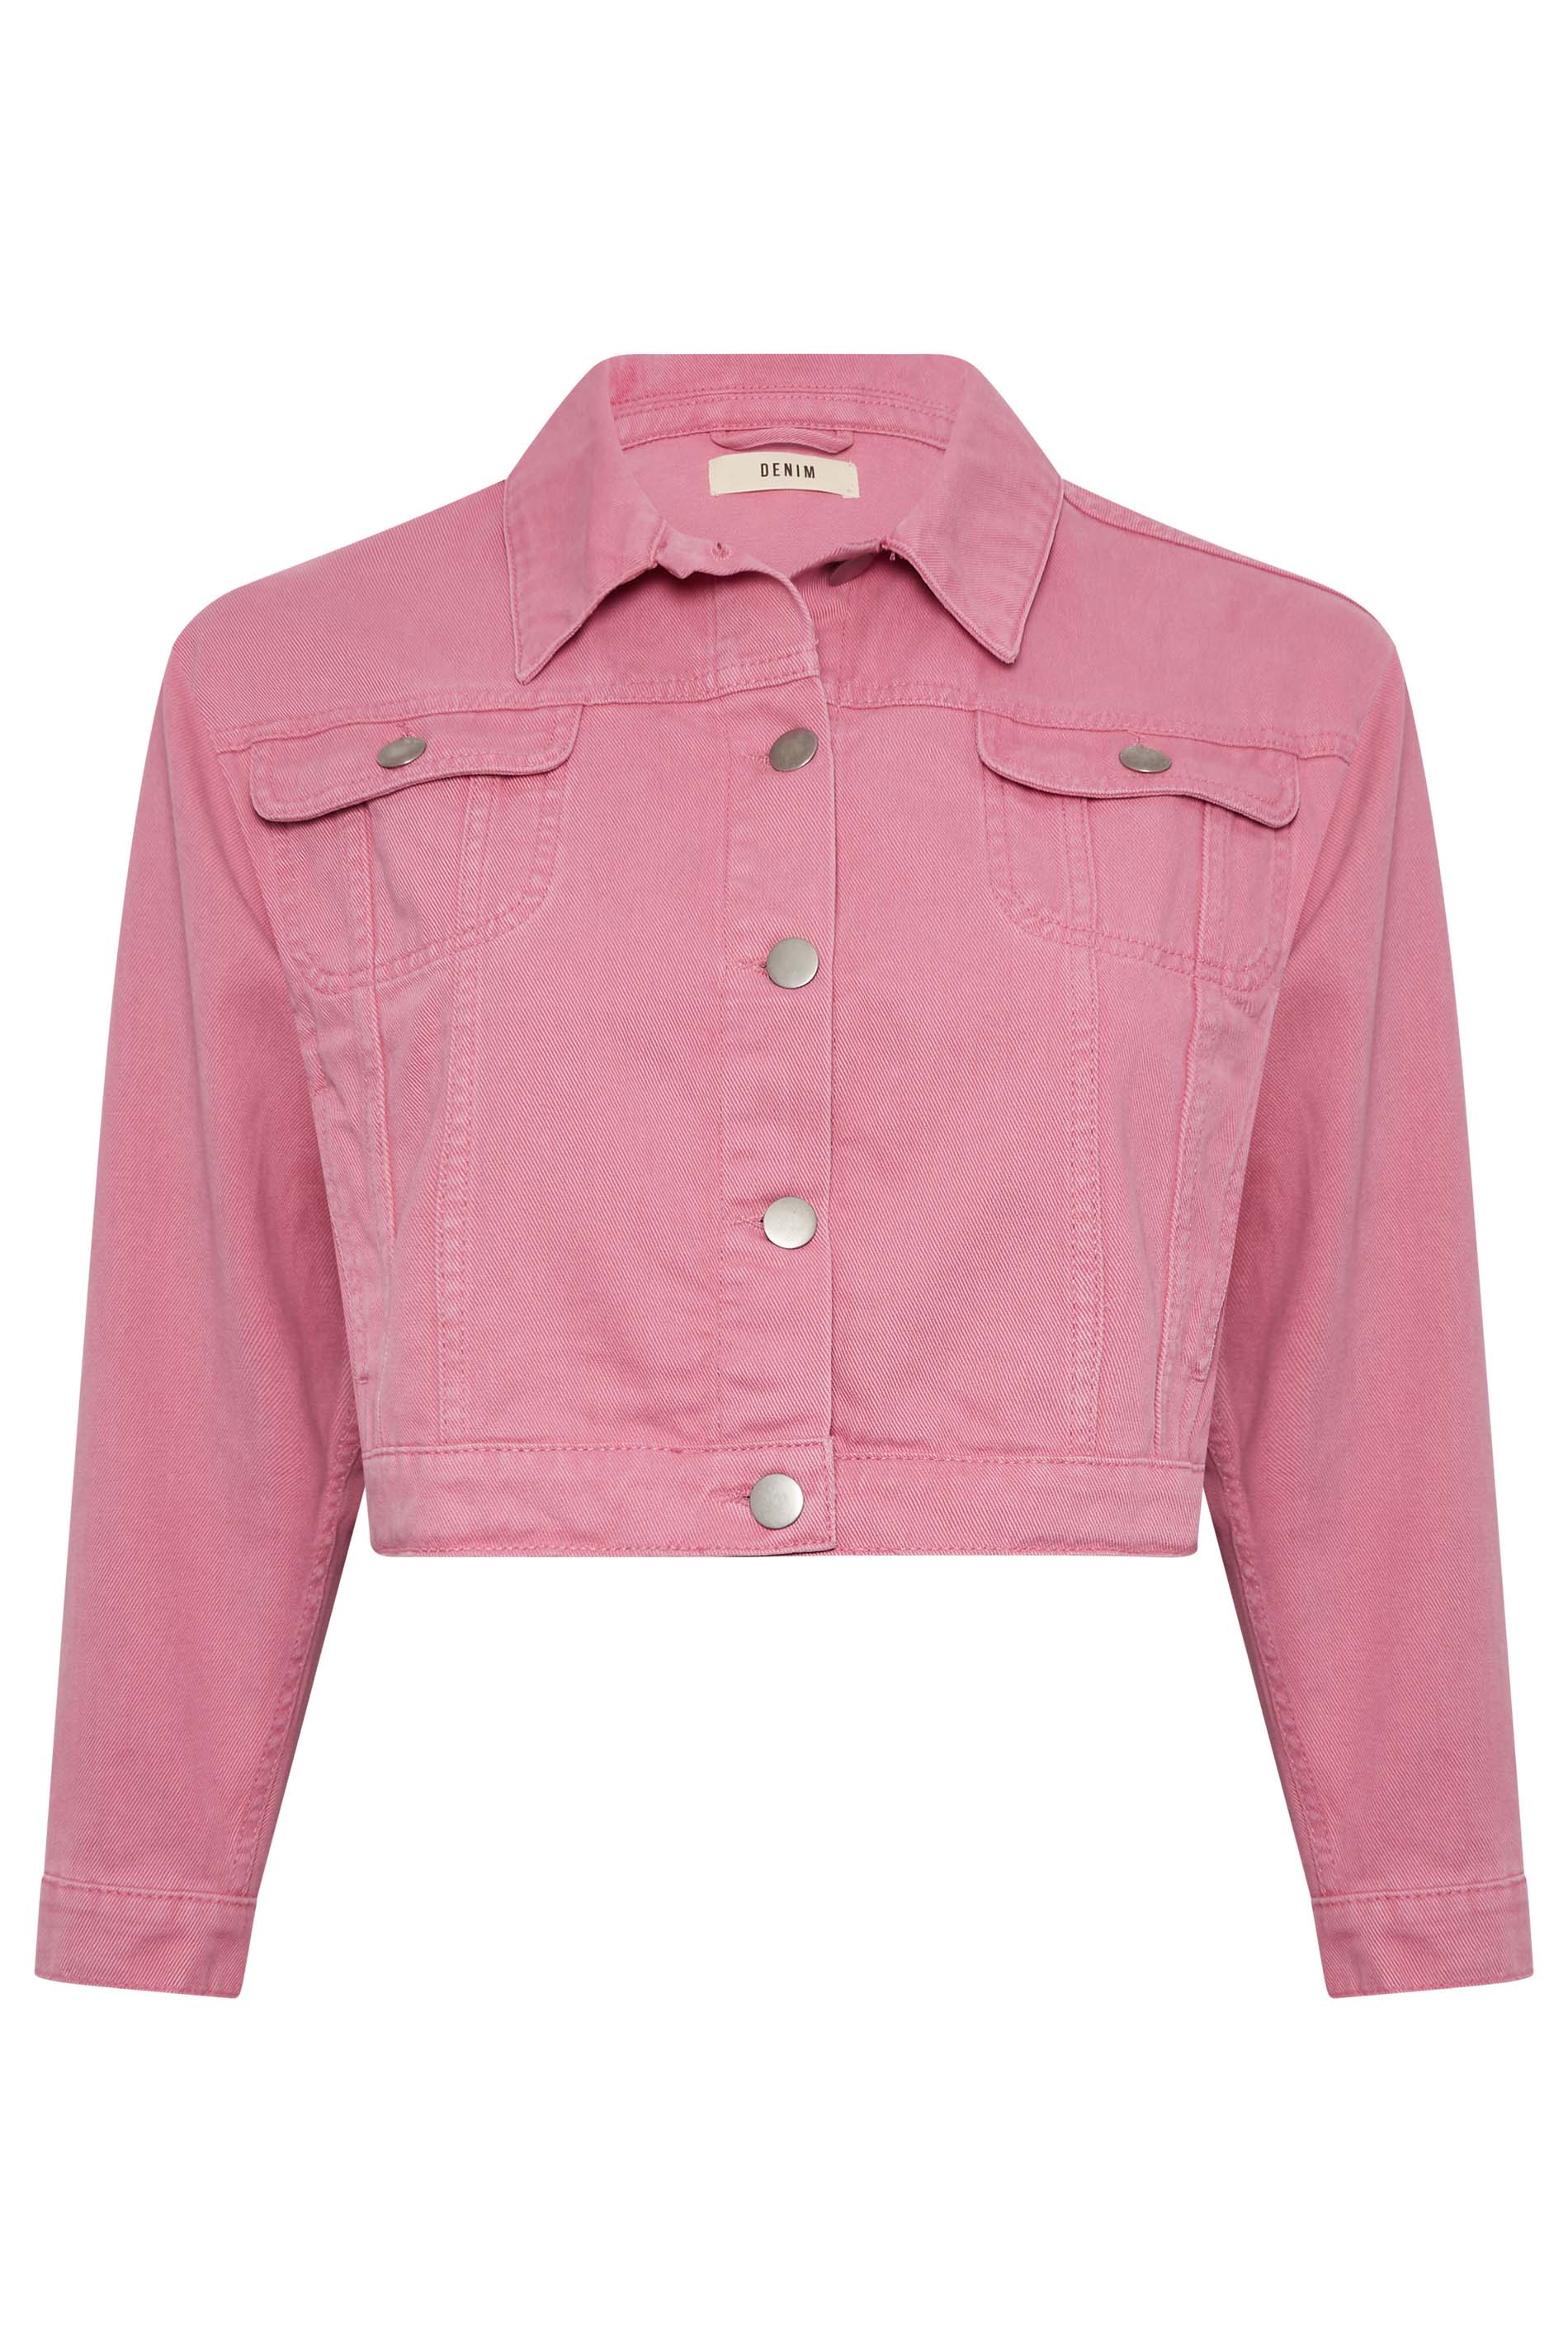 YOURS Plus Size Pink Cropped Denim Jacket | Yours Clothing